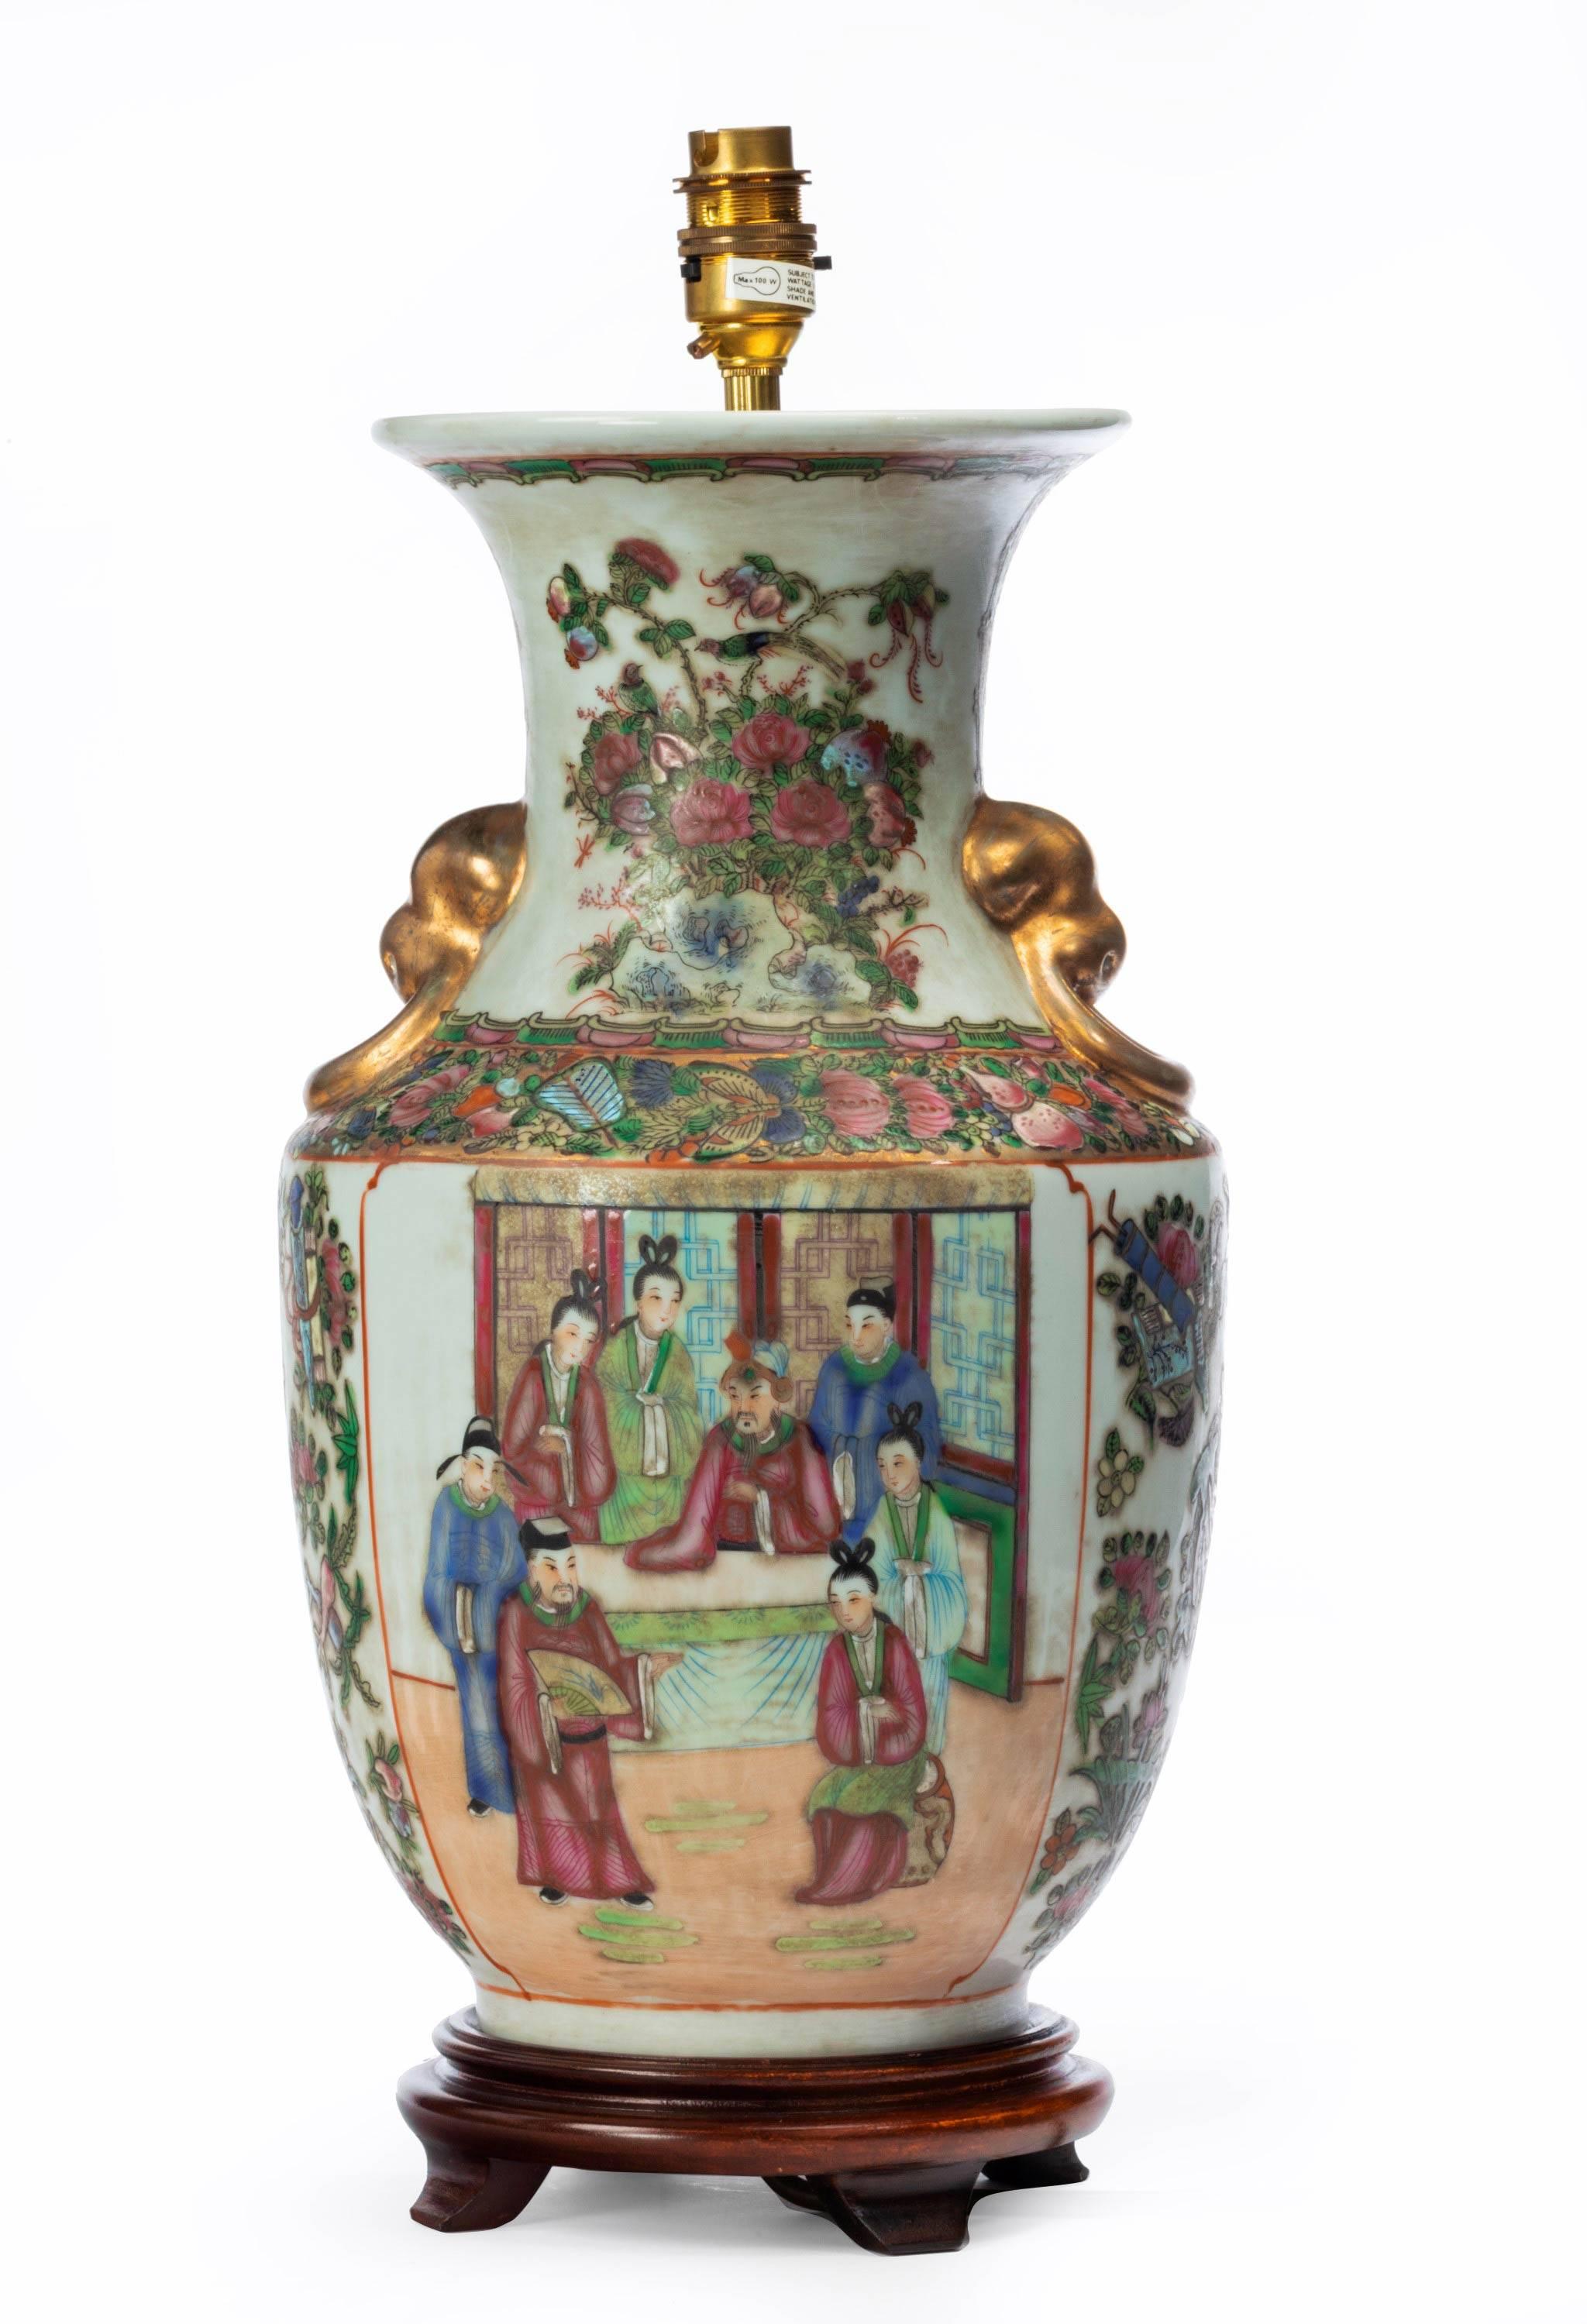 Mid-19th Century Cantonese, Porcelain Lamp with Elaborate Gilding and Decoration